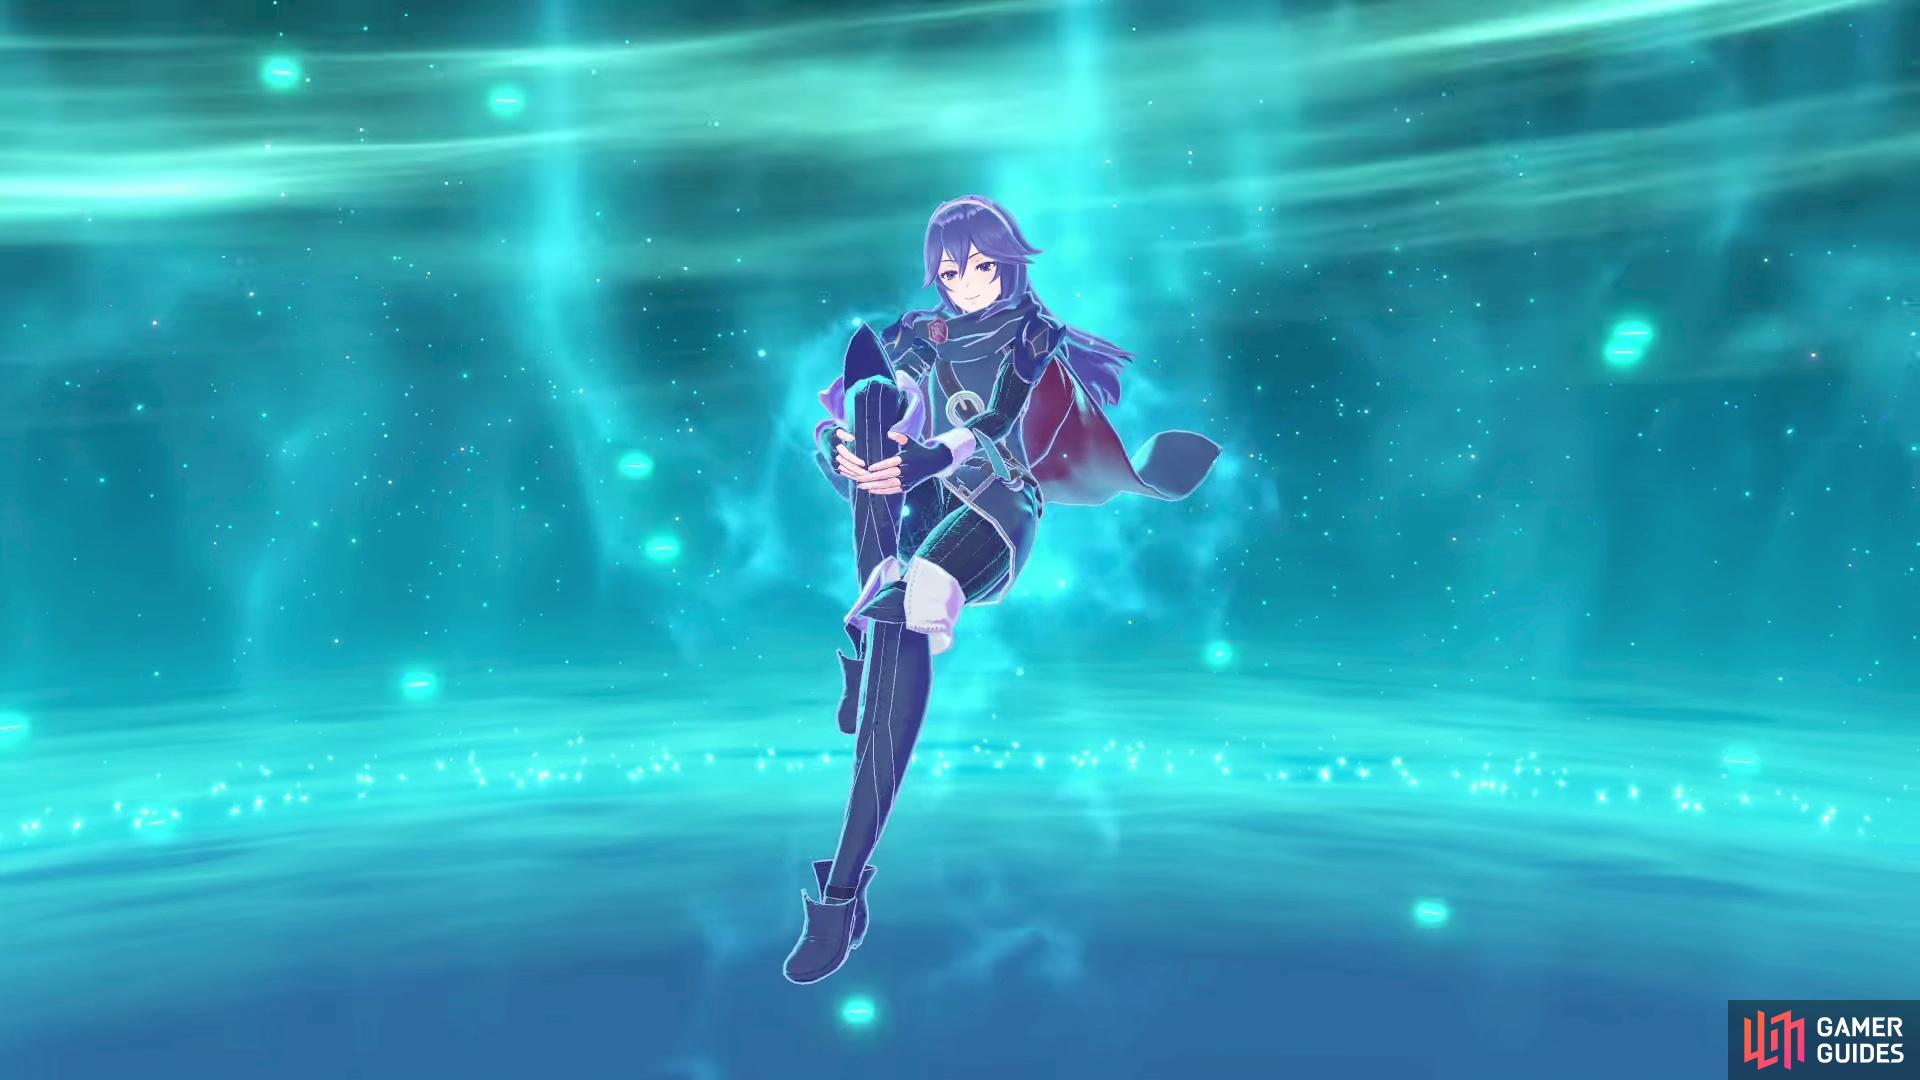 Lucina will join during the battle in Chapter 11.